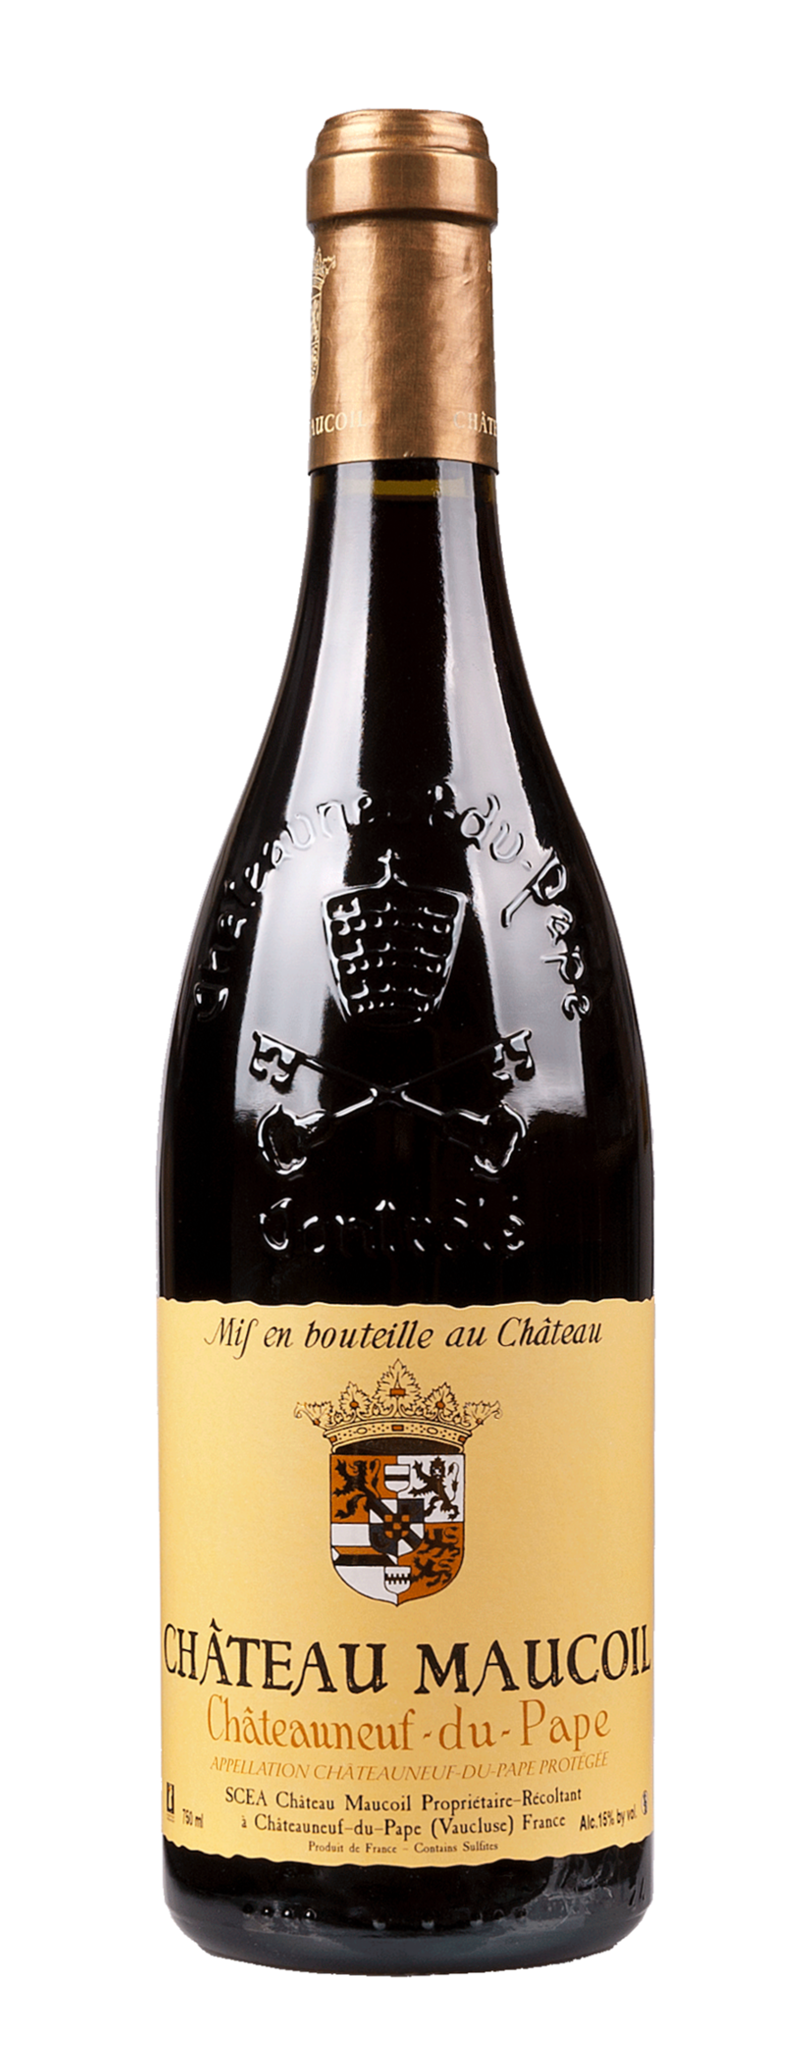 16 Chateauneuf Du Pape Tradition Chateau Maucoil 29 50 Maluni Wines